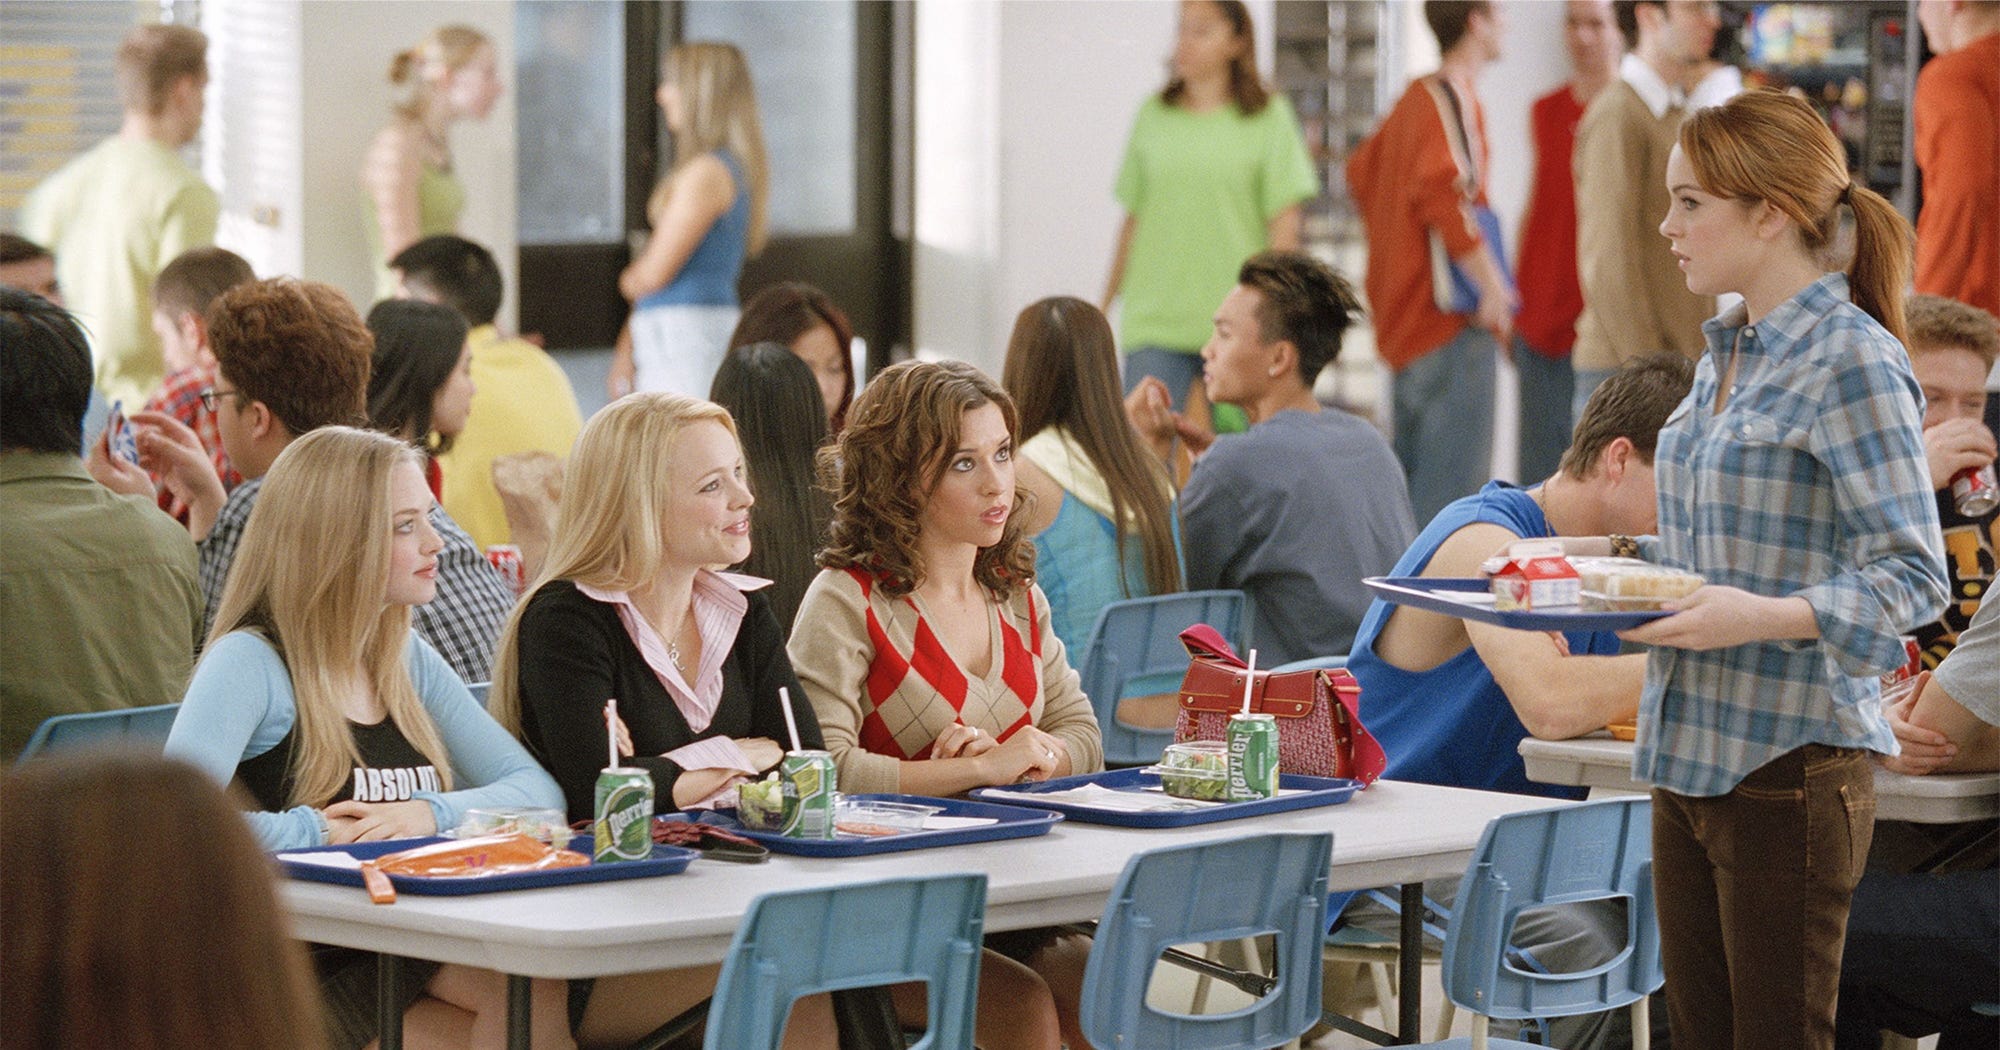 mean_girls_cafeteria